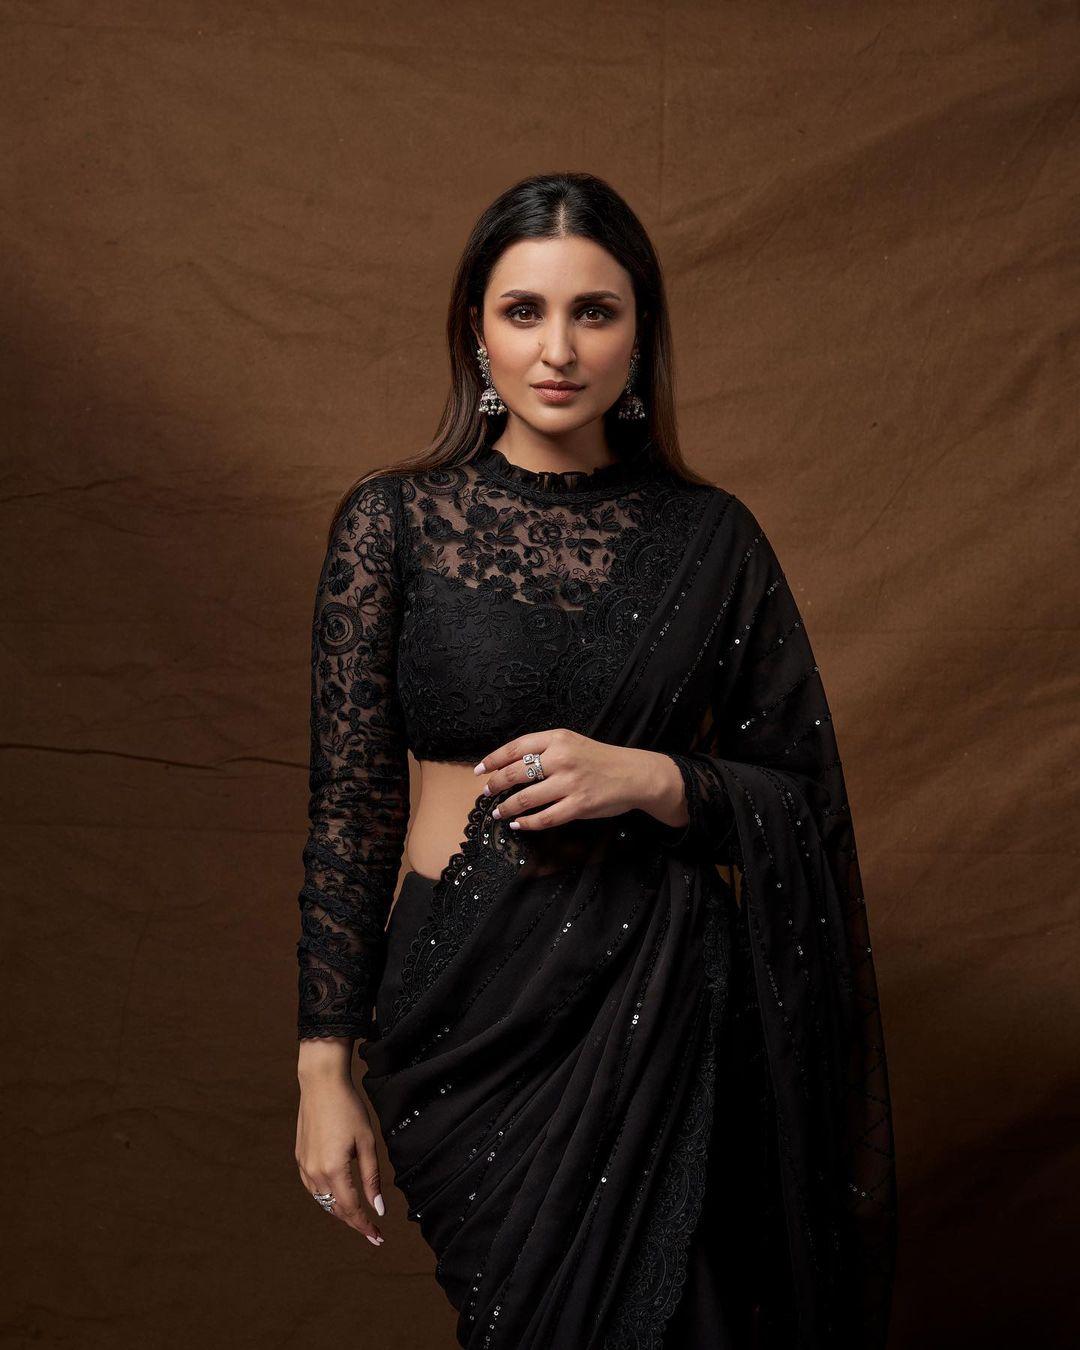 Wearing black, especially in the form of a saree, is always a great choice that is sure to garner compliments